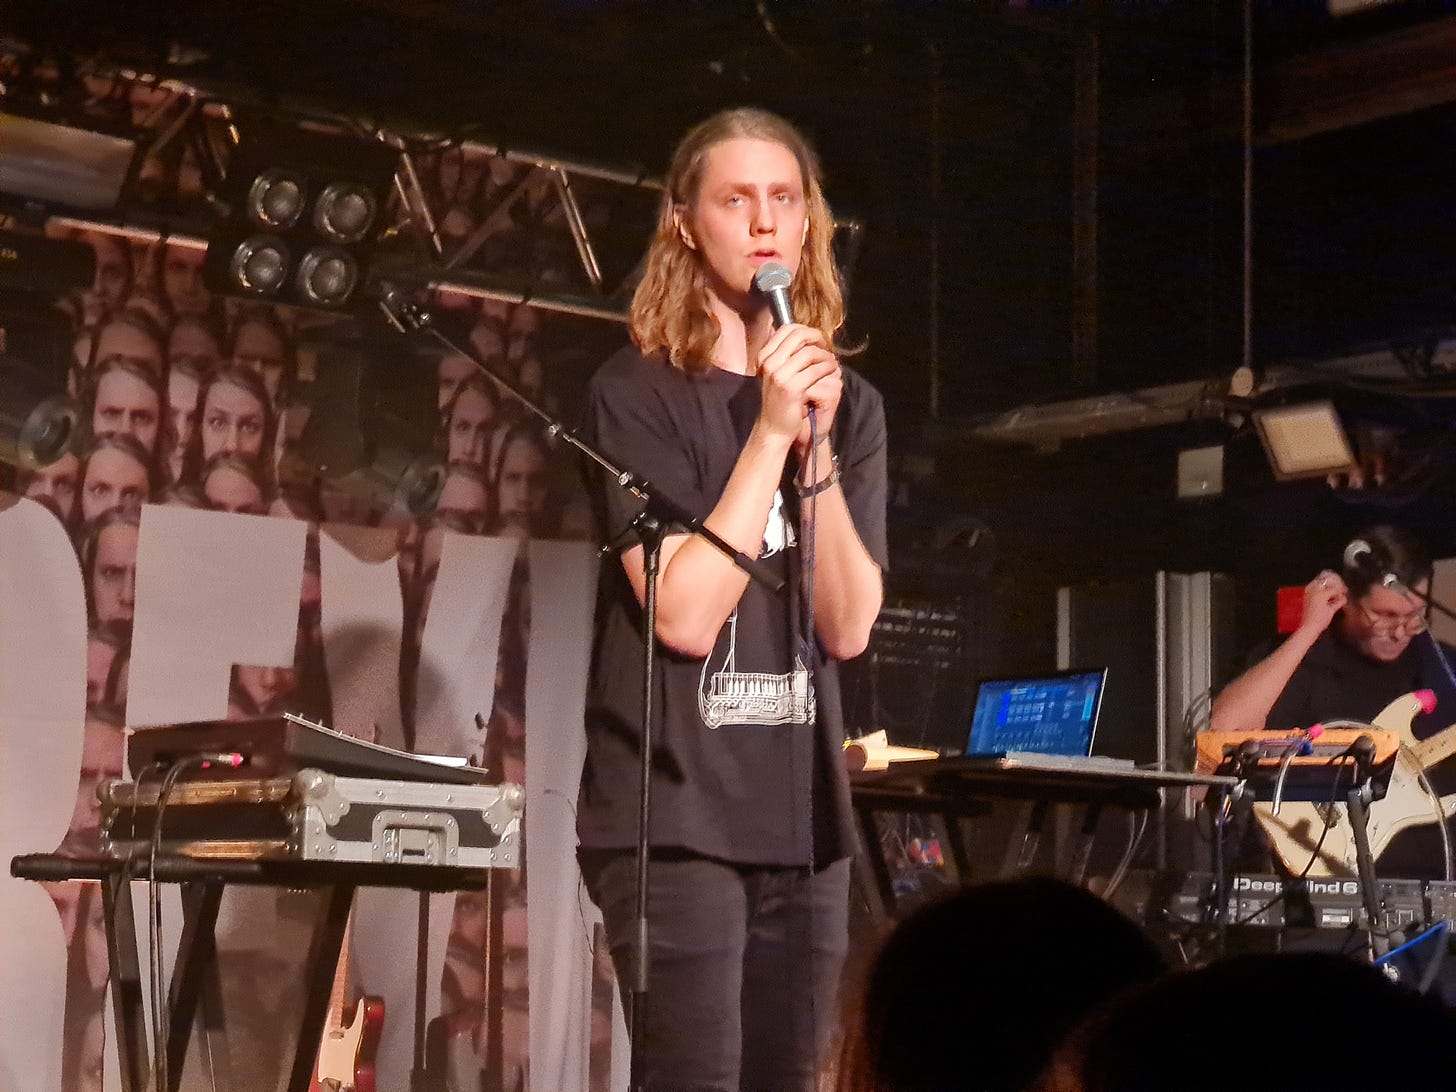 Daði Freyr, a tall white man with long blonde hair, is holding a microphone and looking at the camera. He is surrounded by electronic instruments and a laptop, and there is a dark-haired man playing guitar in the background.